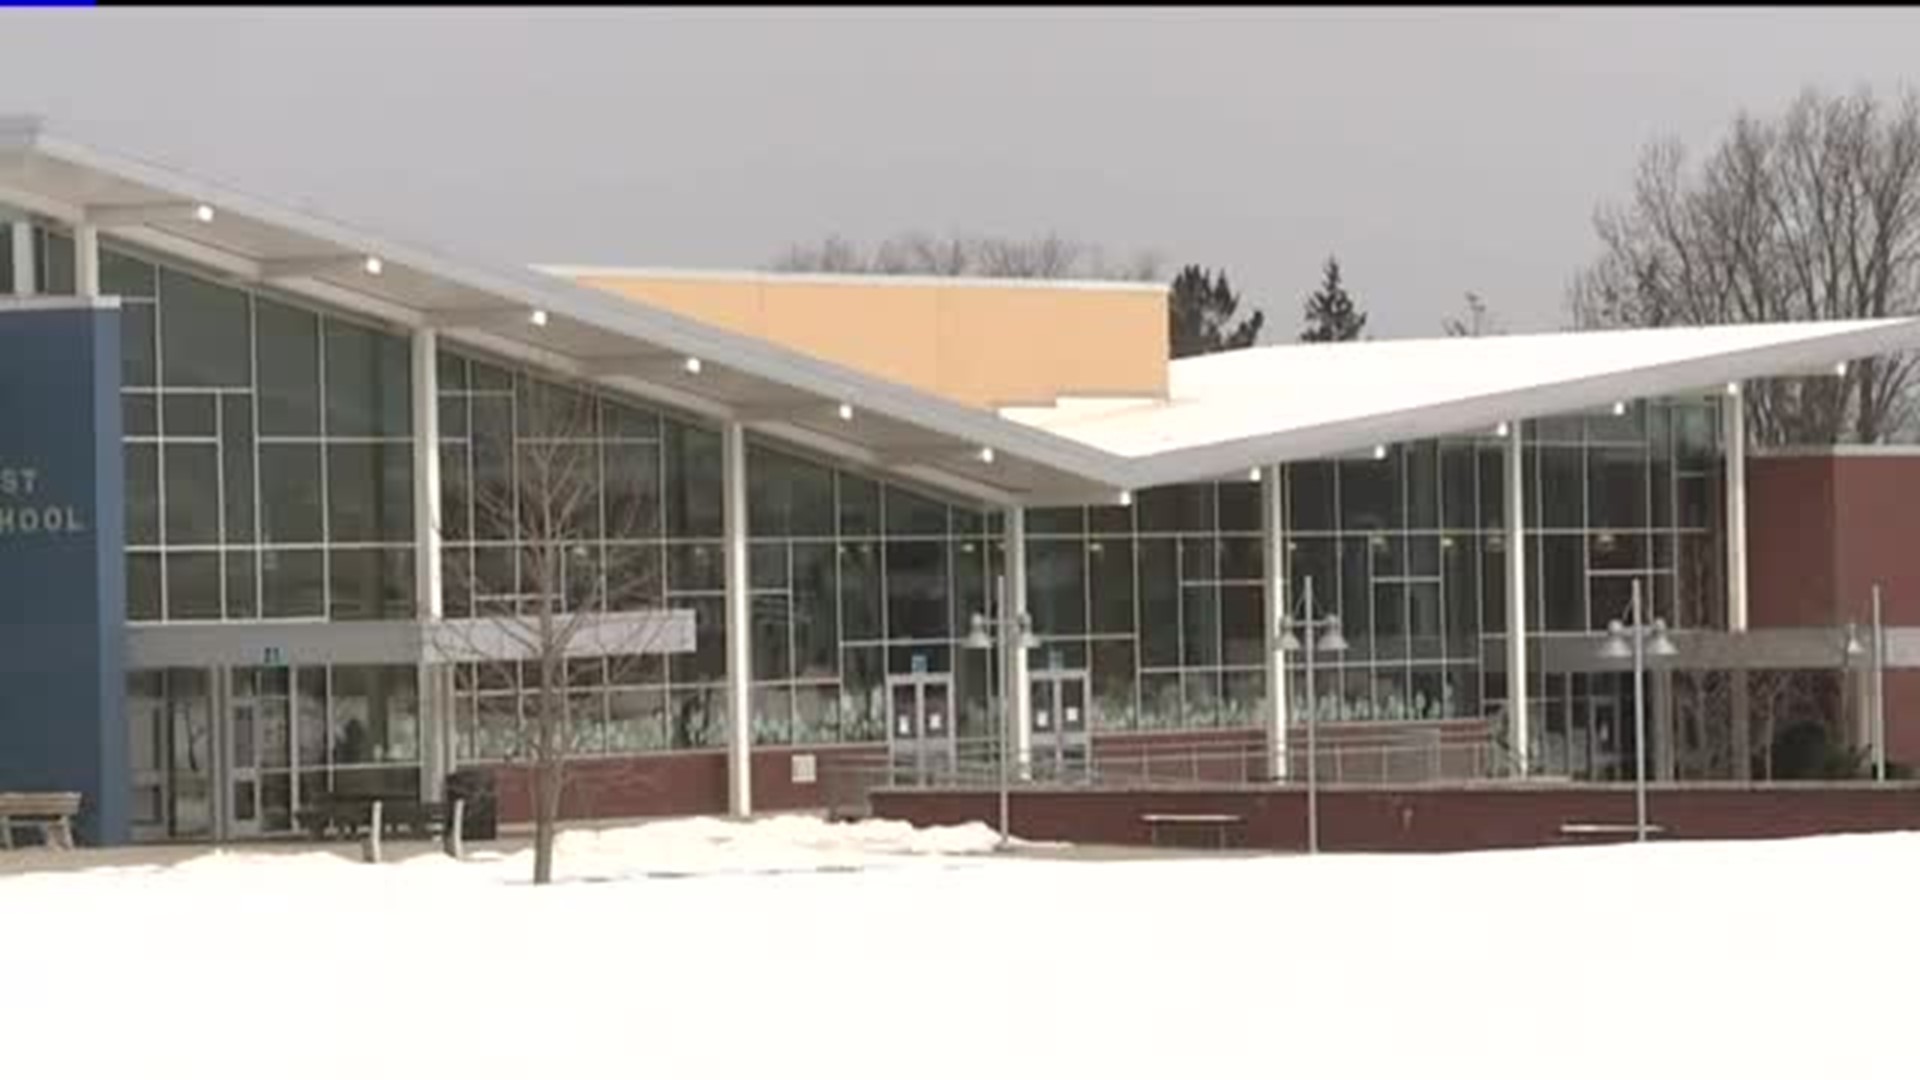 Bullying Concerns at Midd-West High School